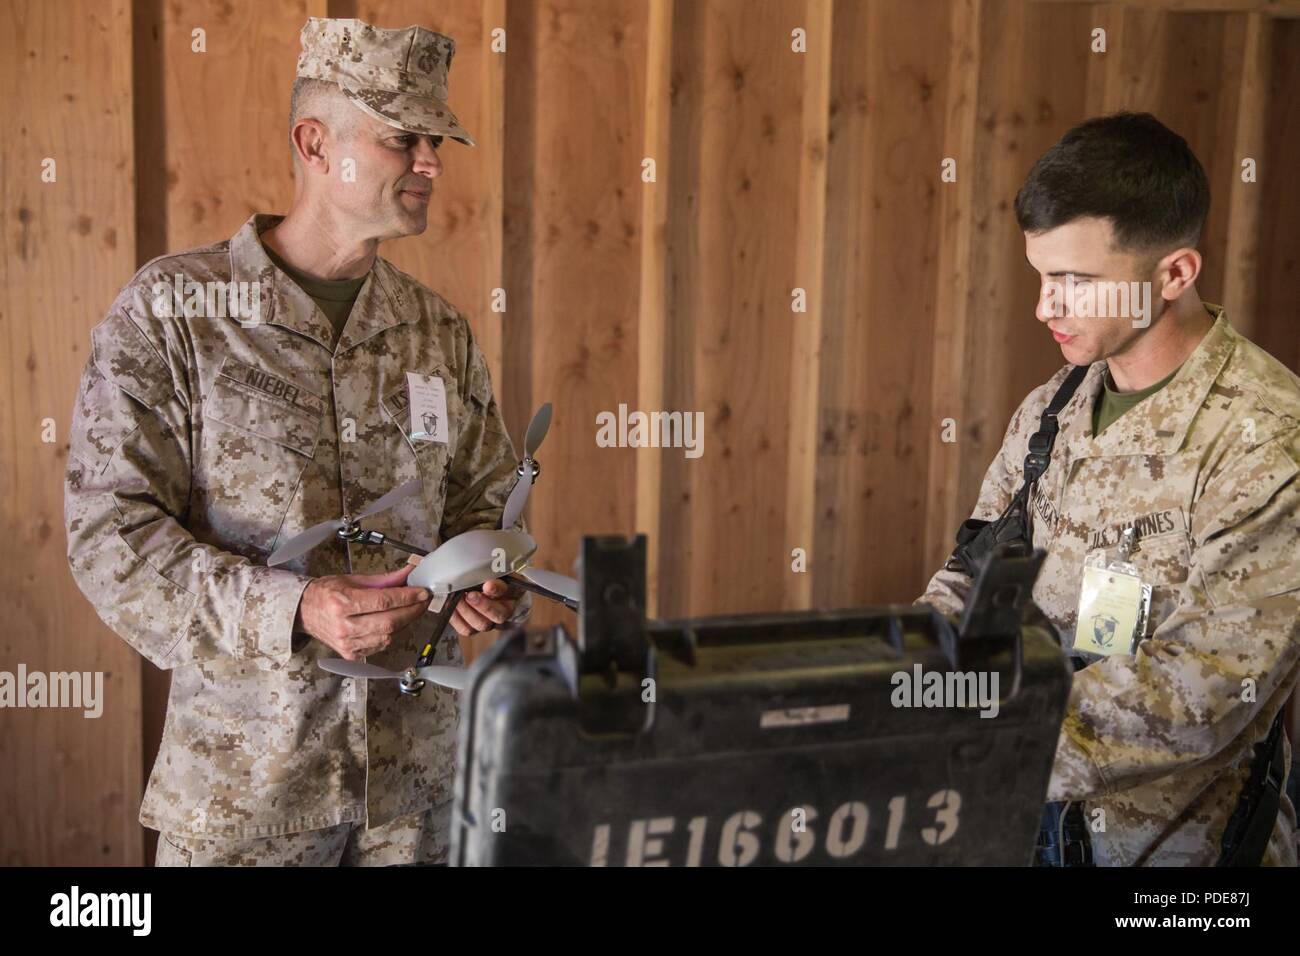 U.S. Marine Corps 2nd Lt. Michael Francica, right, with Combat Logistics Battalion 8, Combat Logistics Regiment 2, 2nd Marine Logistics Group, shows Col. Andrew Niebel, chief of staff, 2nd MLG, the InstantEye small unmanned aerial vehicle during Integrated Training Exercise 3-18 on Marine Corps Air Ground Combat Center, Twentynine Palms, Calif., May 14, 2018. The Chief of Staff visited ITX 3-18 to oversee the implementation of innovative technologies in a field environment. Stock Photo